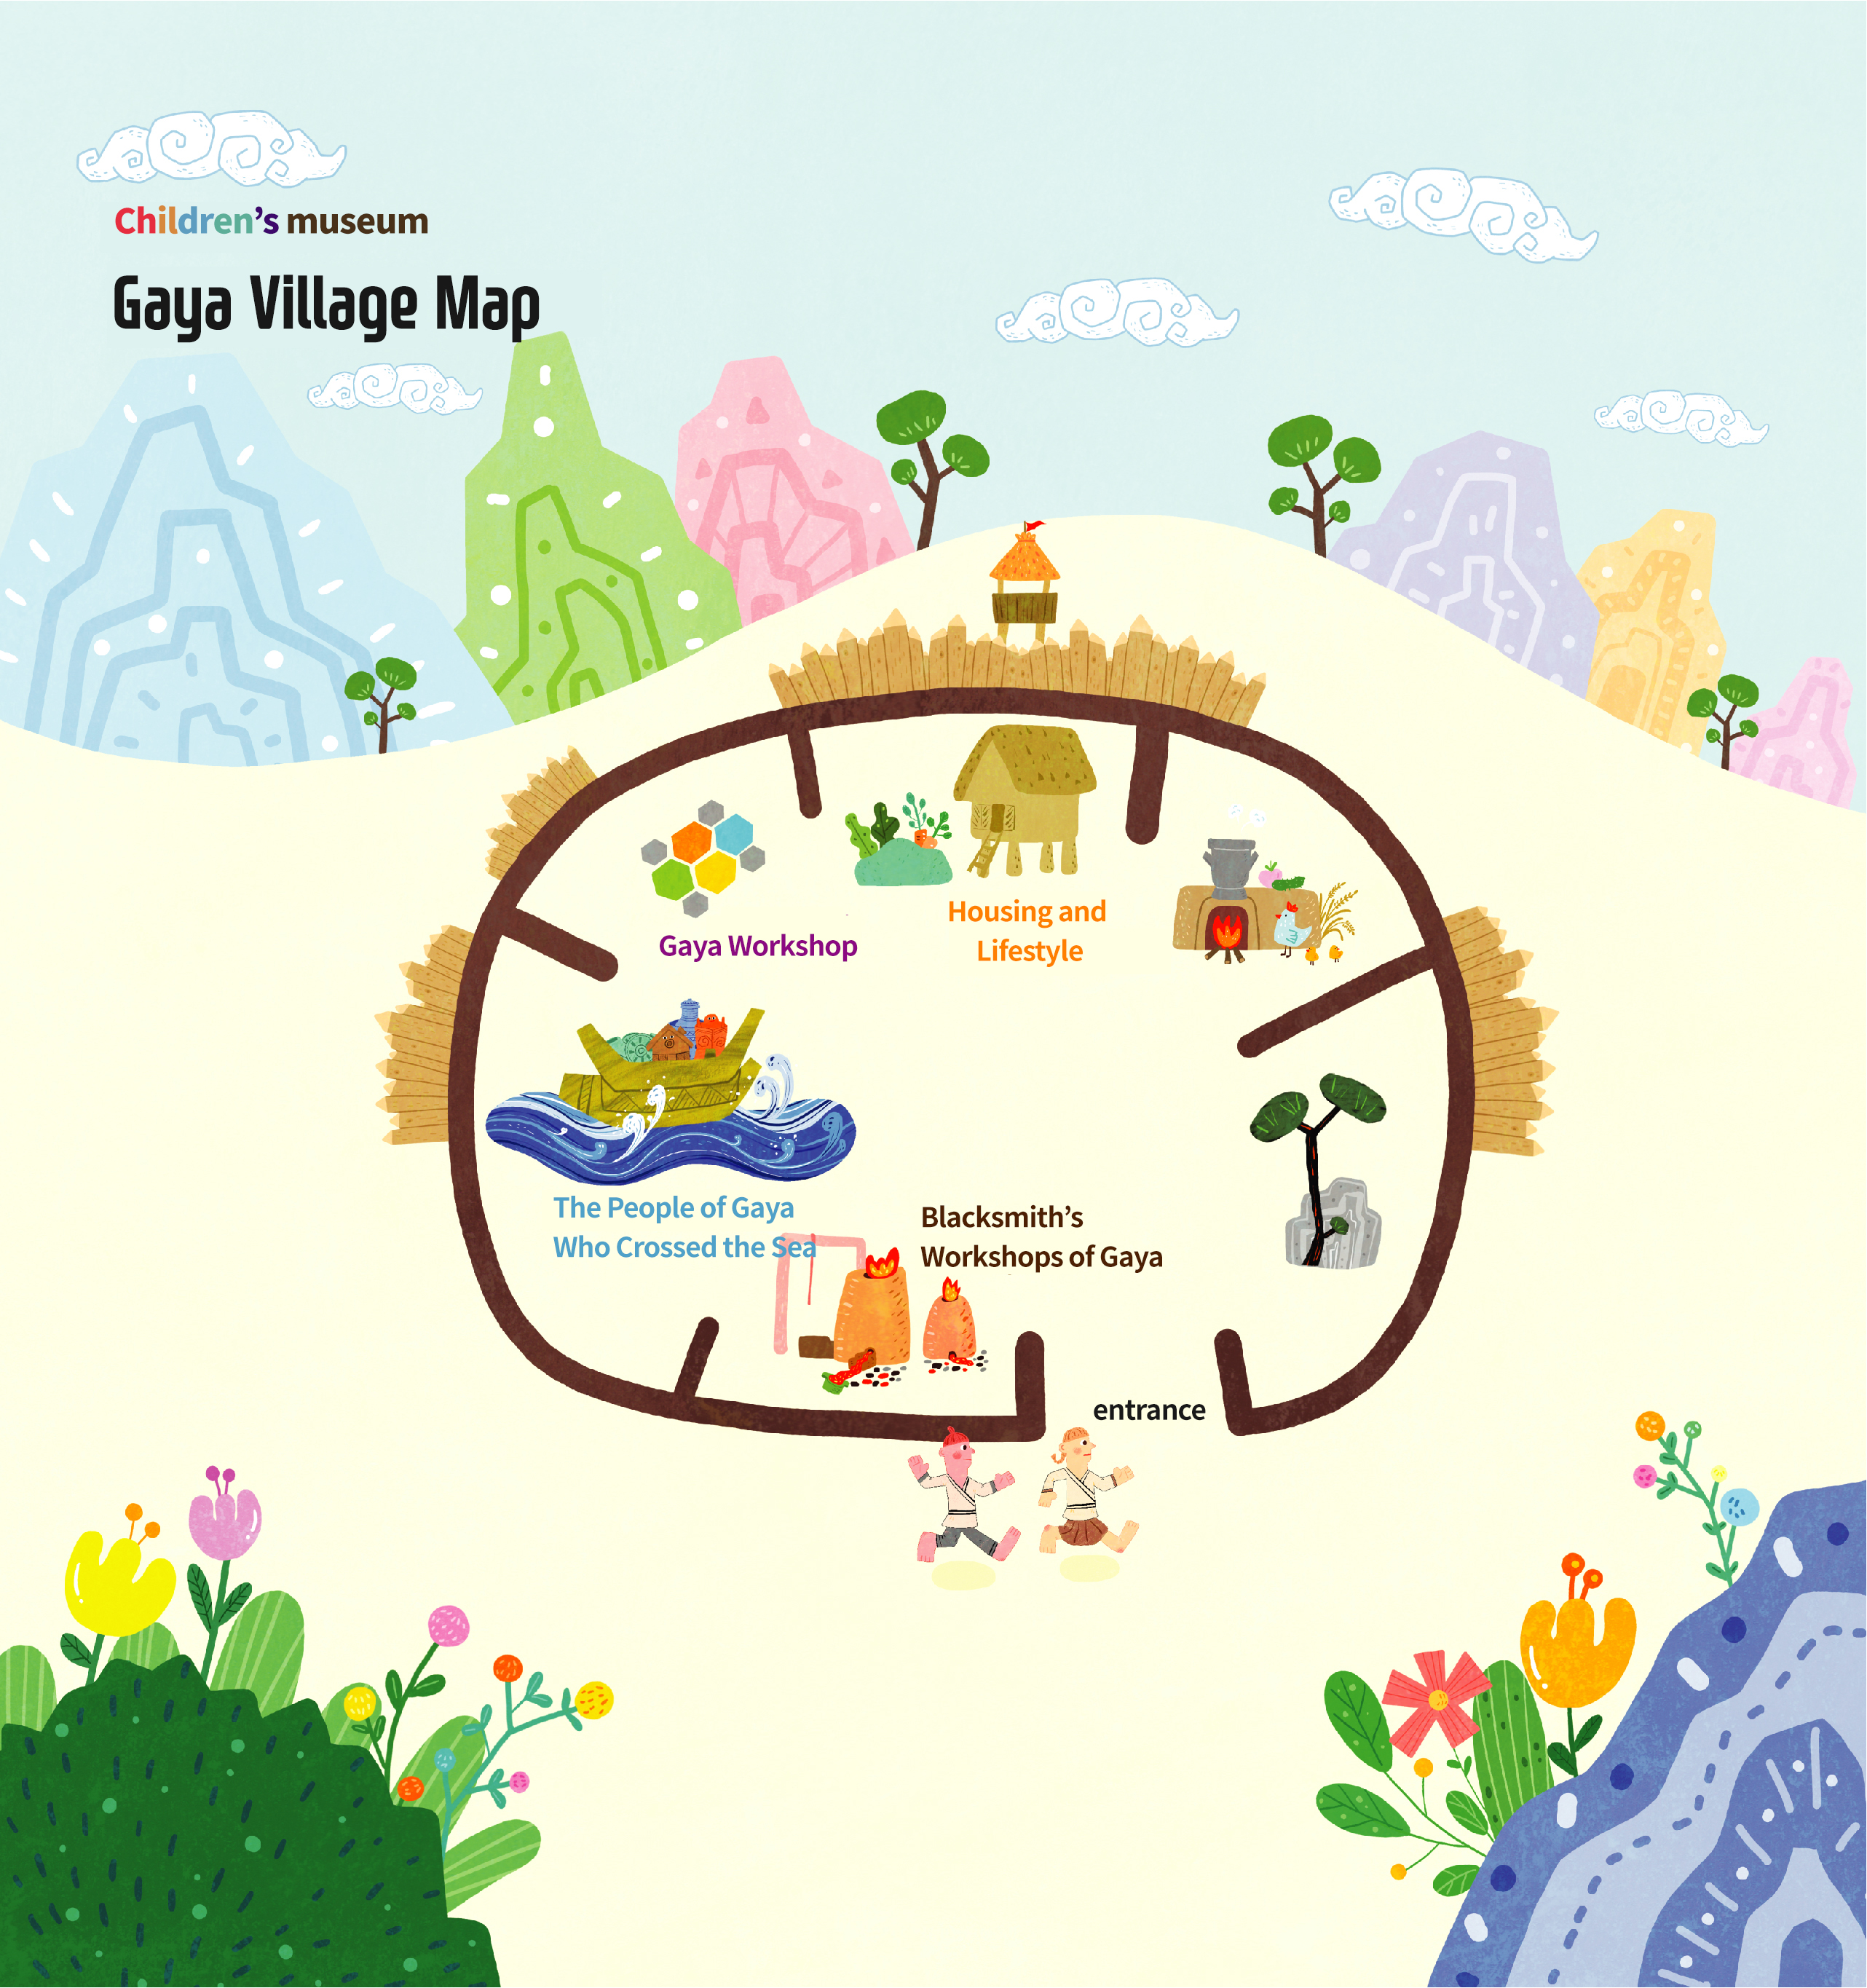 This is a Children's museum Gaya village Map. When you enter the entrance, you can see Blacksmith's Workshops of Gaya, The people of Gaya Who crossed the Sea, Gaya Workshop and Housing and Lifestyle.